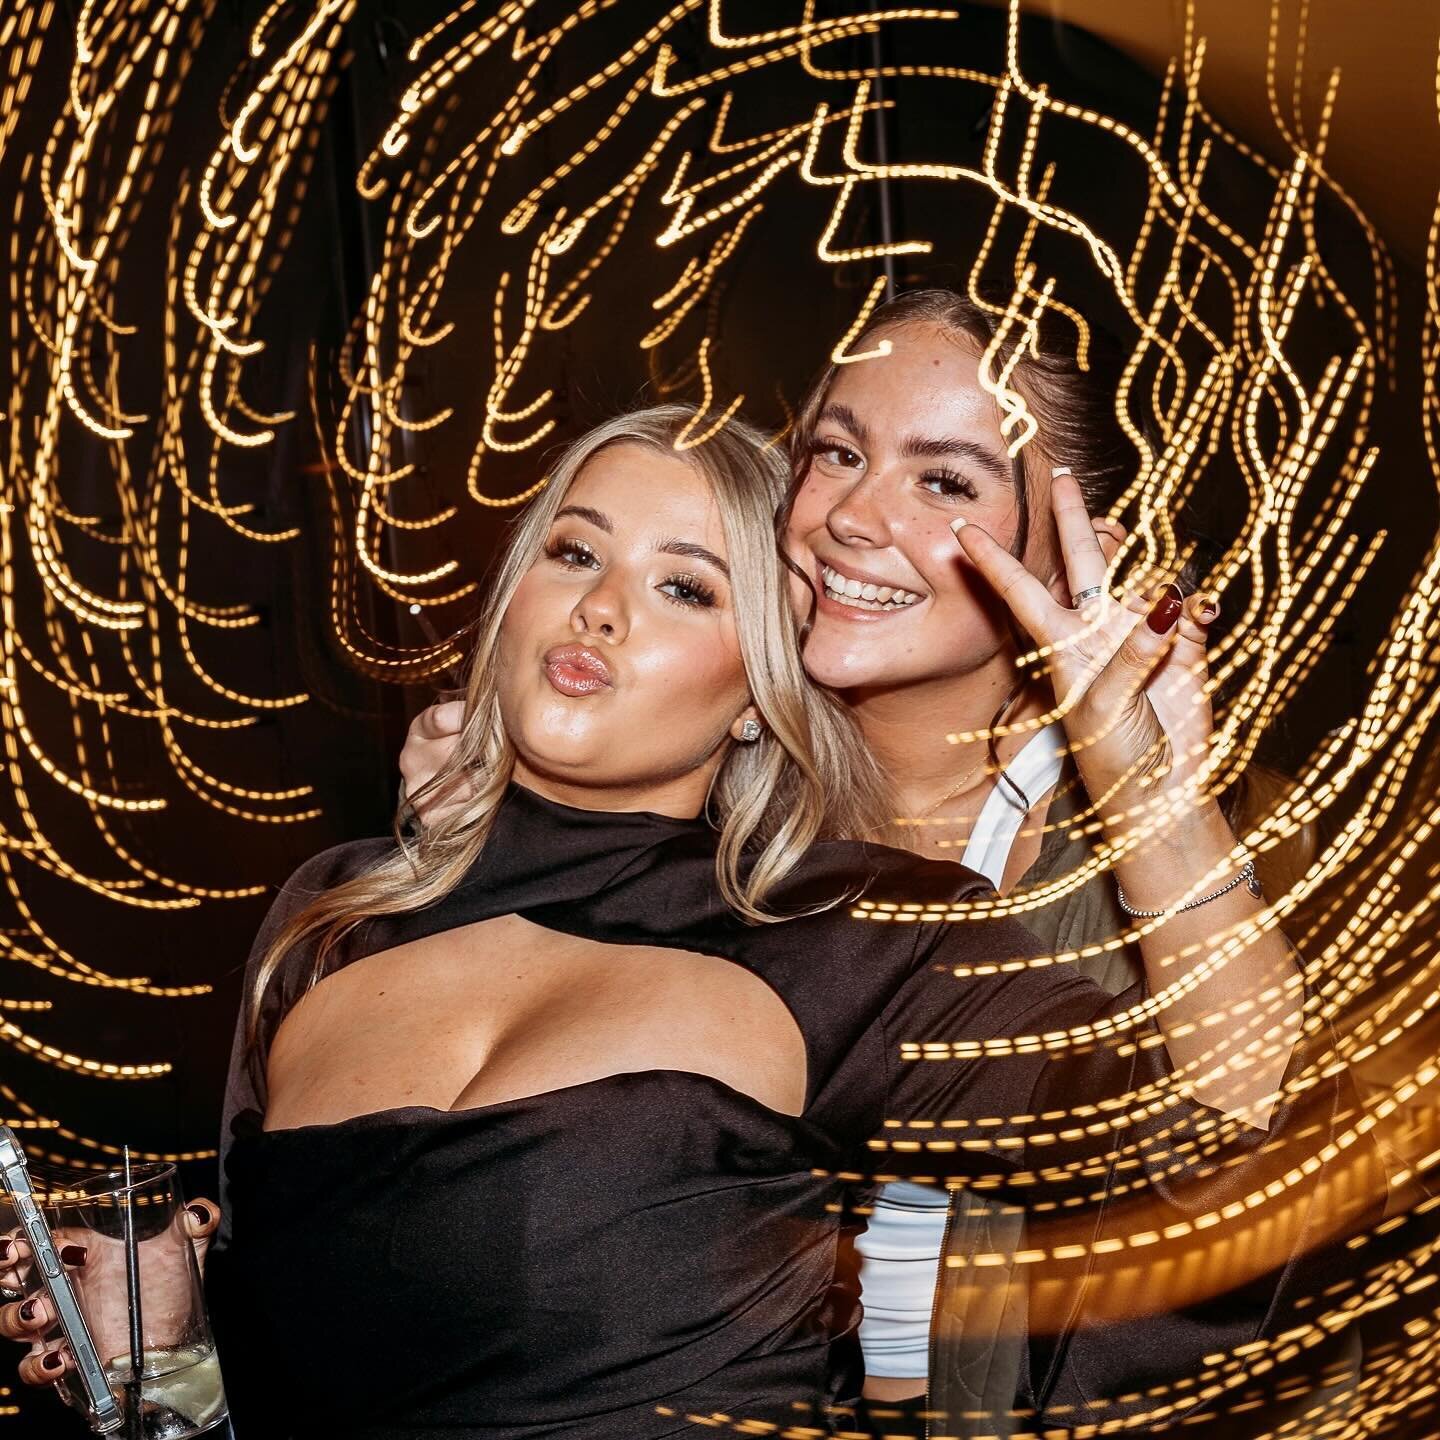 Maddy&rsquo;s magical 21st Birthday at the Colony Club HQ in Wilmslow✨🥂

From the dazzling fairy lights to the vibrant atmosphere, this Birthday was an unforgettable celebration. Swipe left to join the party vibes!🎈🎉

#maddys21st #party #colonyclu